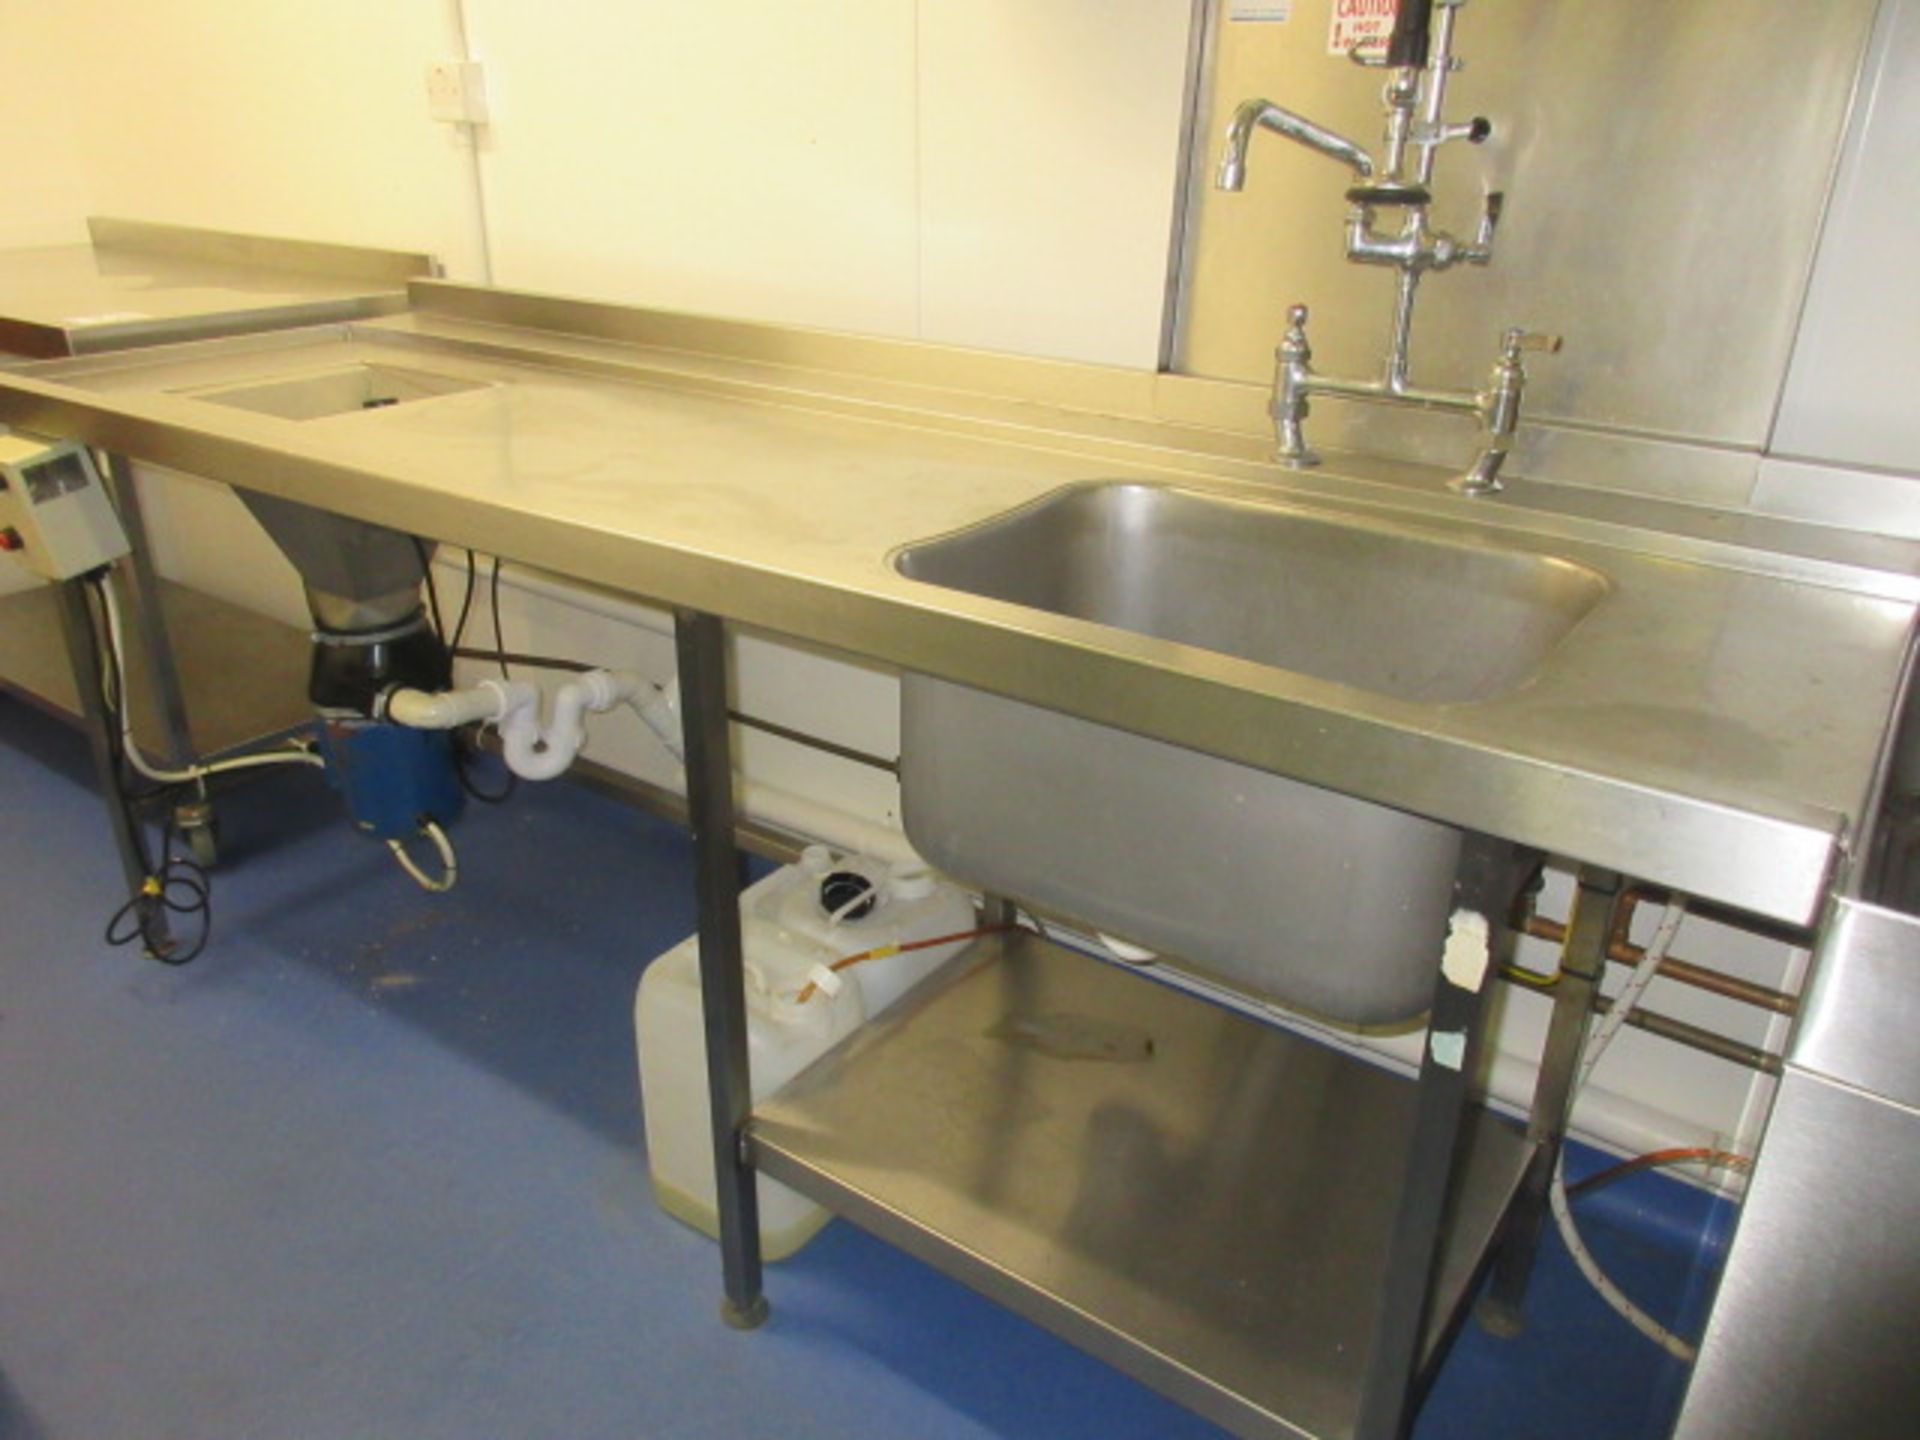 Canteen Wash Down Sink and Waste Disposal Unit Holehouse Road. Gallery canteen.